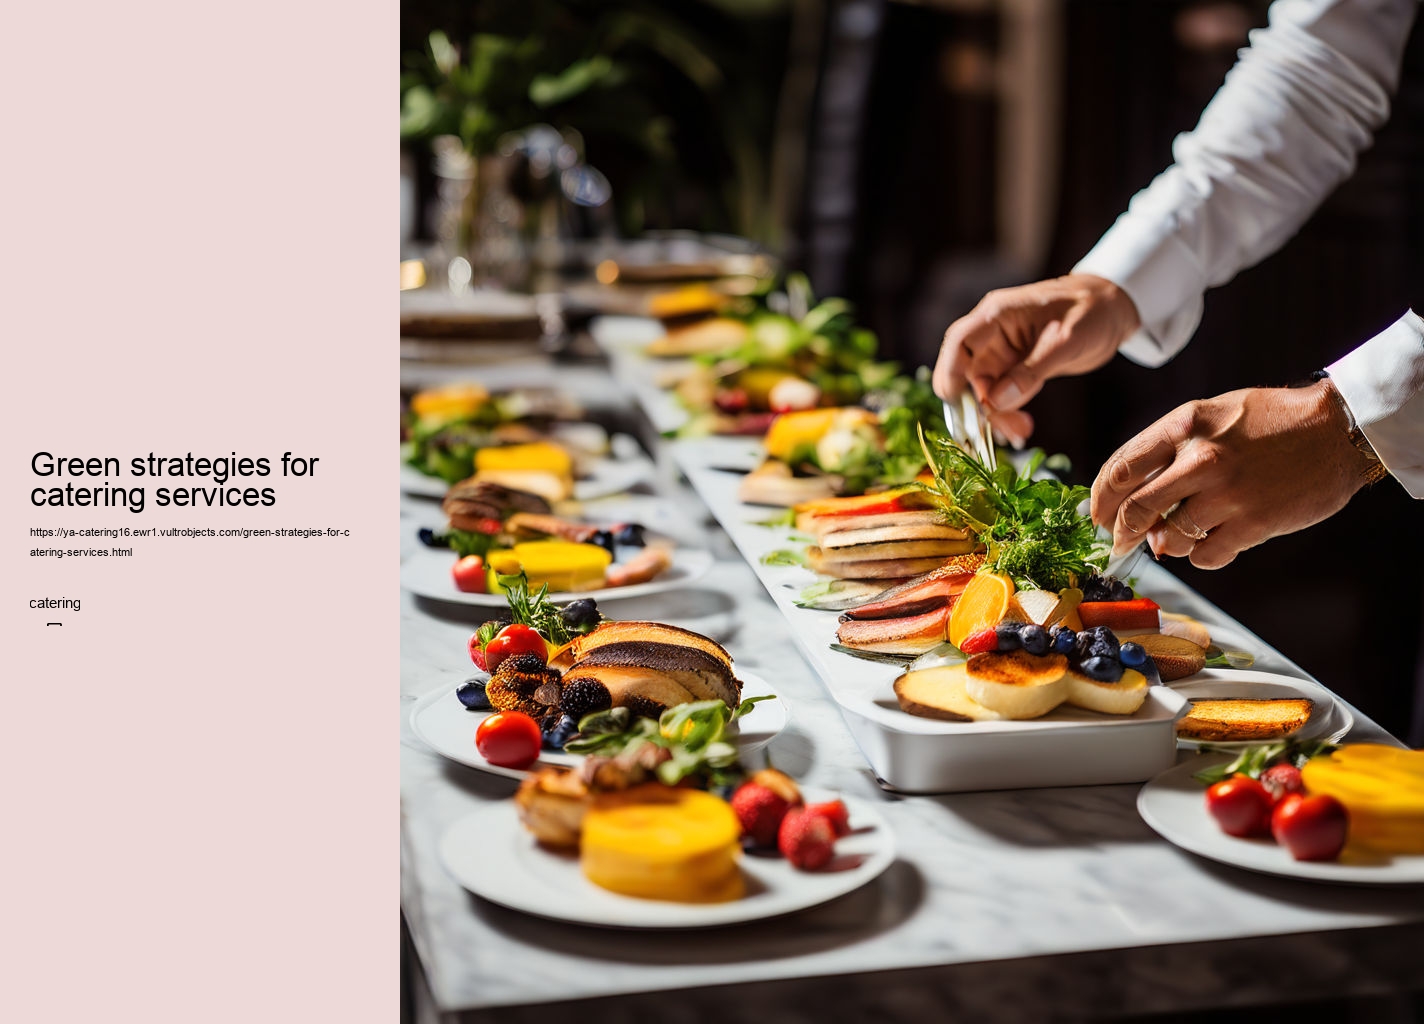 Green strategies for catering services